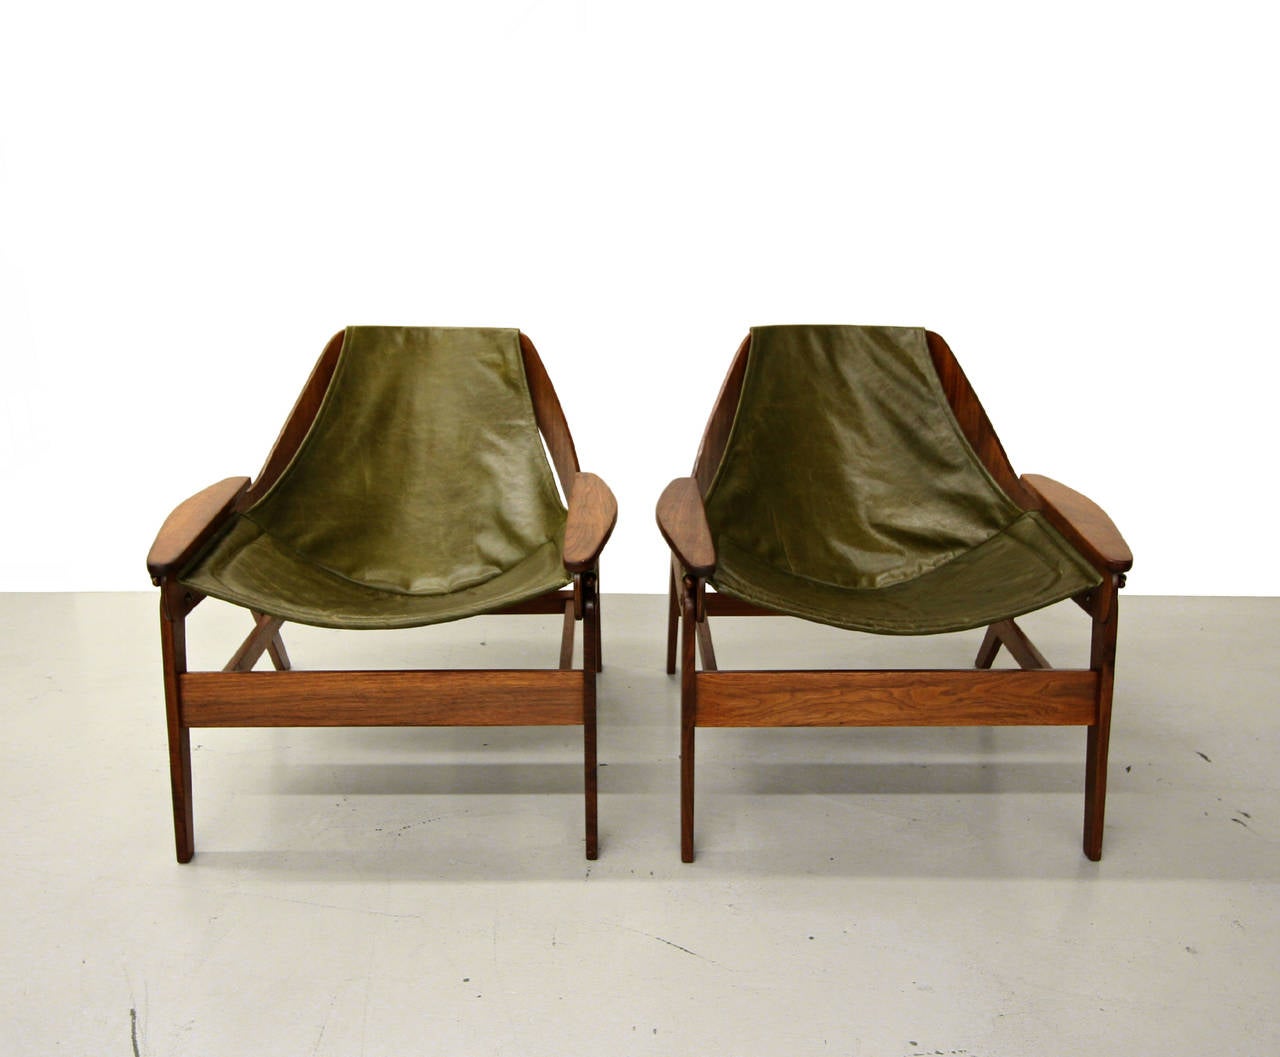 Beautiful pair of Jerry Johnson walnut and leather sling chairs.  The chairs feature beautiful sculptural frames and newly upholstered dark green slings.  These chairs are the epitome of mid century seating.  More like art than chairs really.